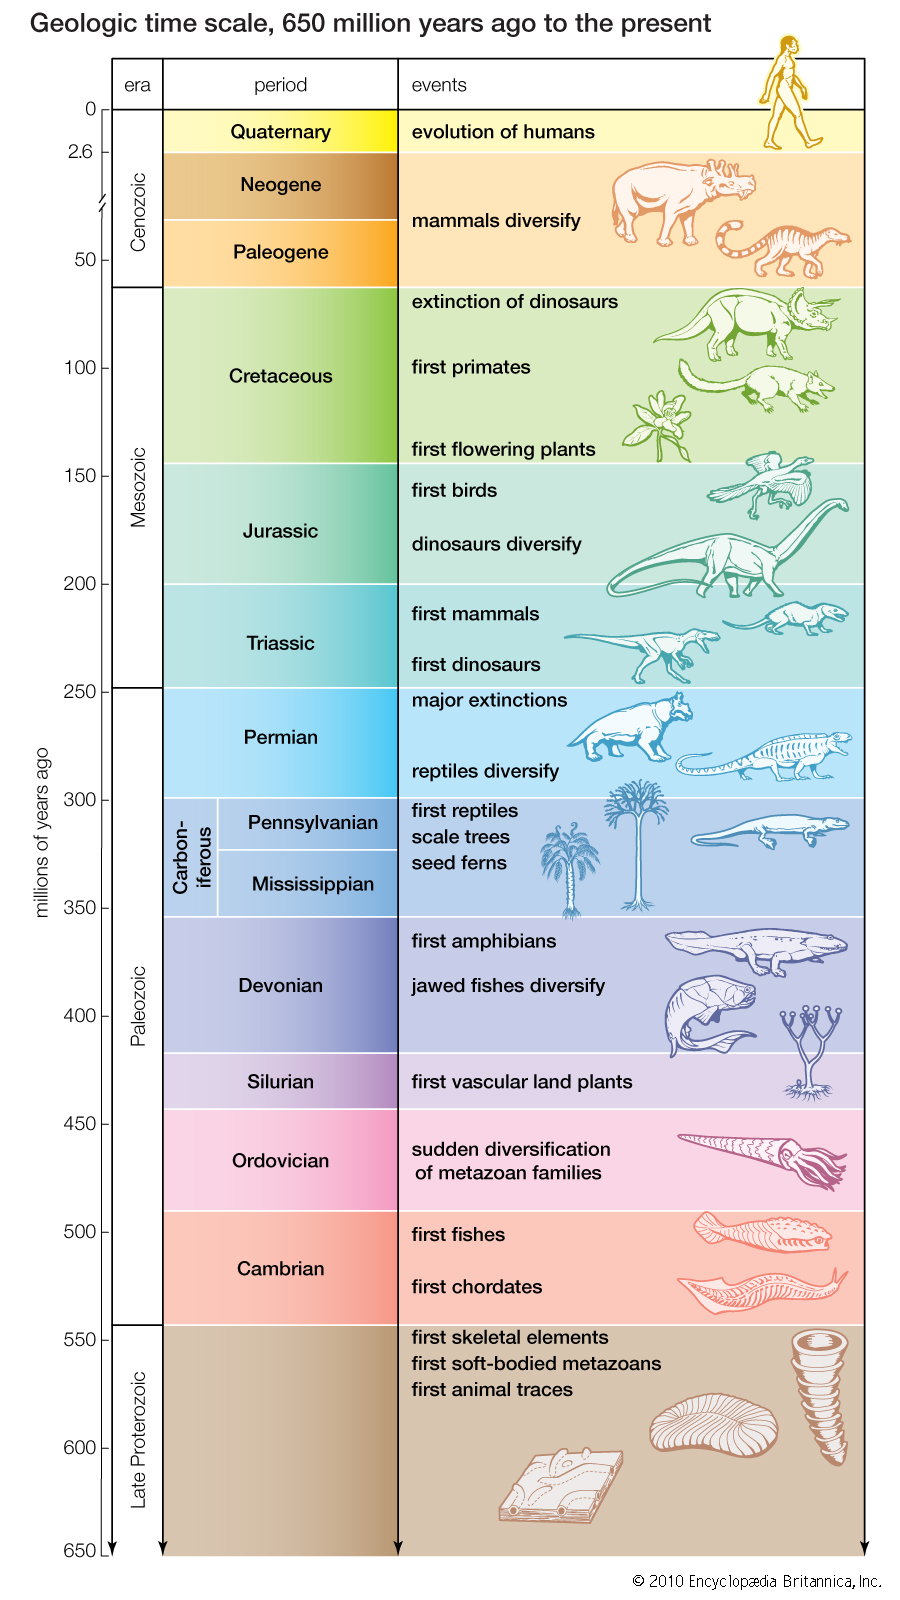 Geologic Time Scale 650 Million Years Ago to the Present - How Many Millions of Years Ago, Era, Period, and Events